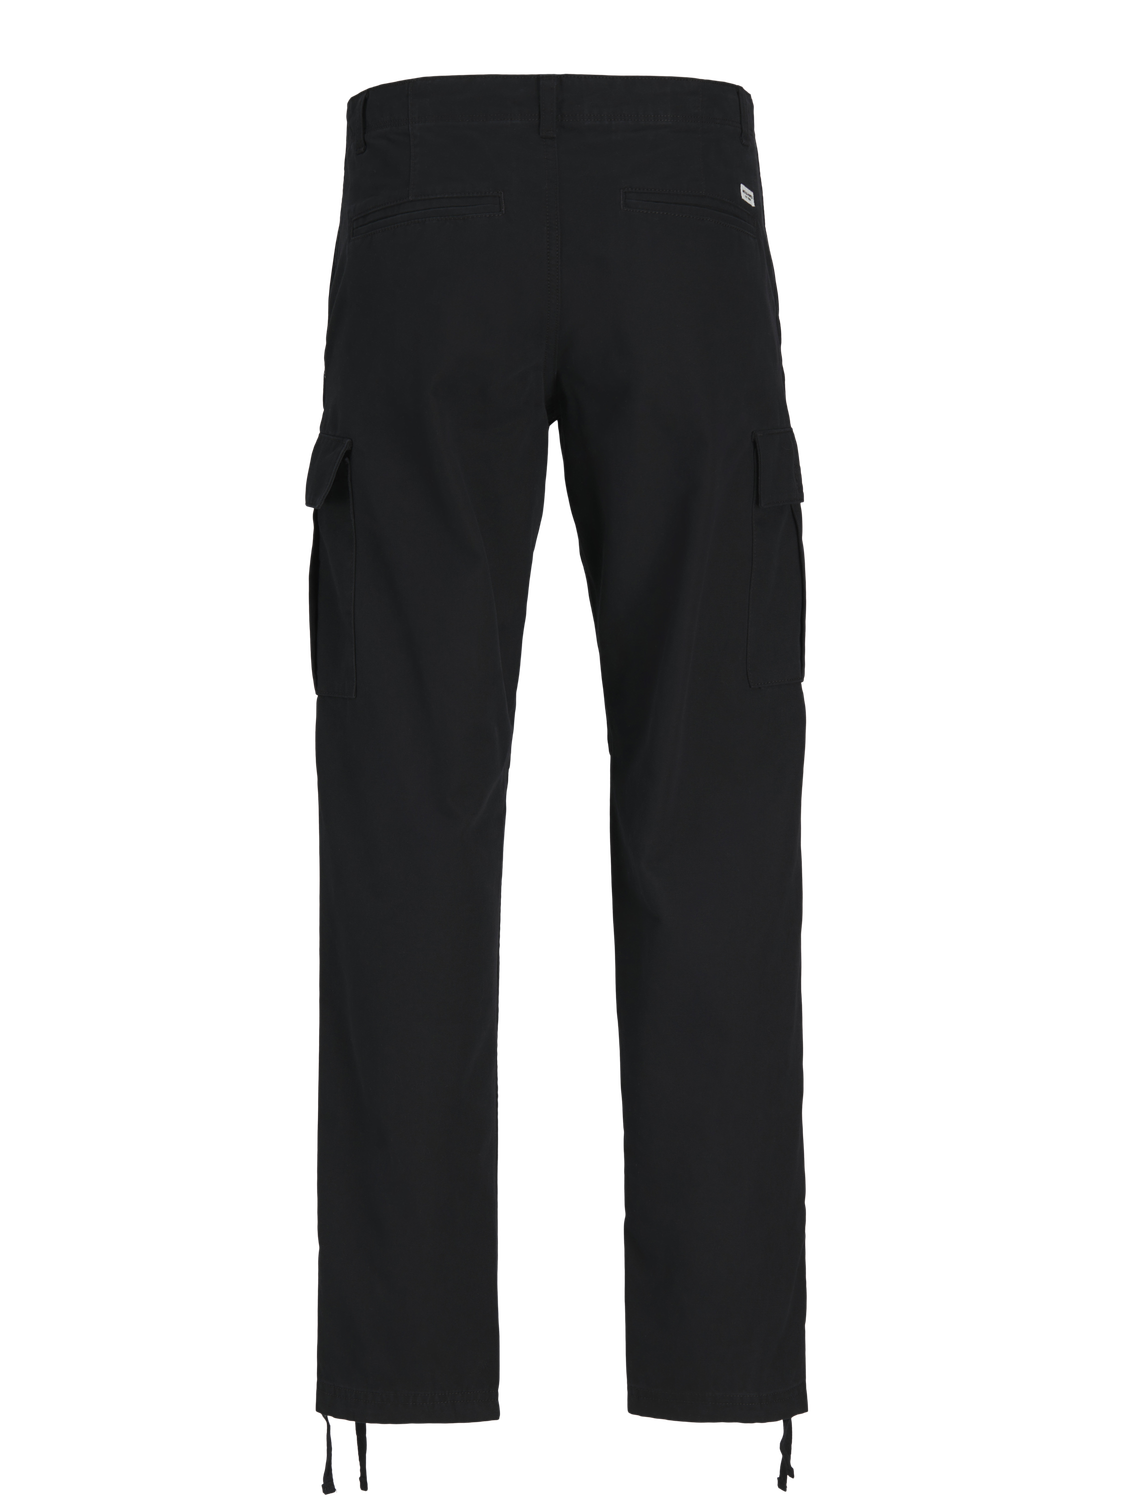 Jack & Jones Relaxed Fit Cargo trousers -Black - 12258150